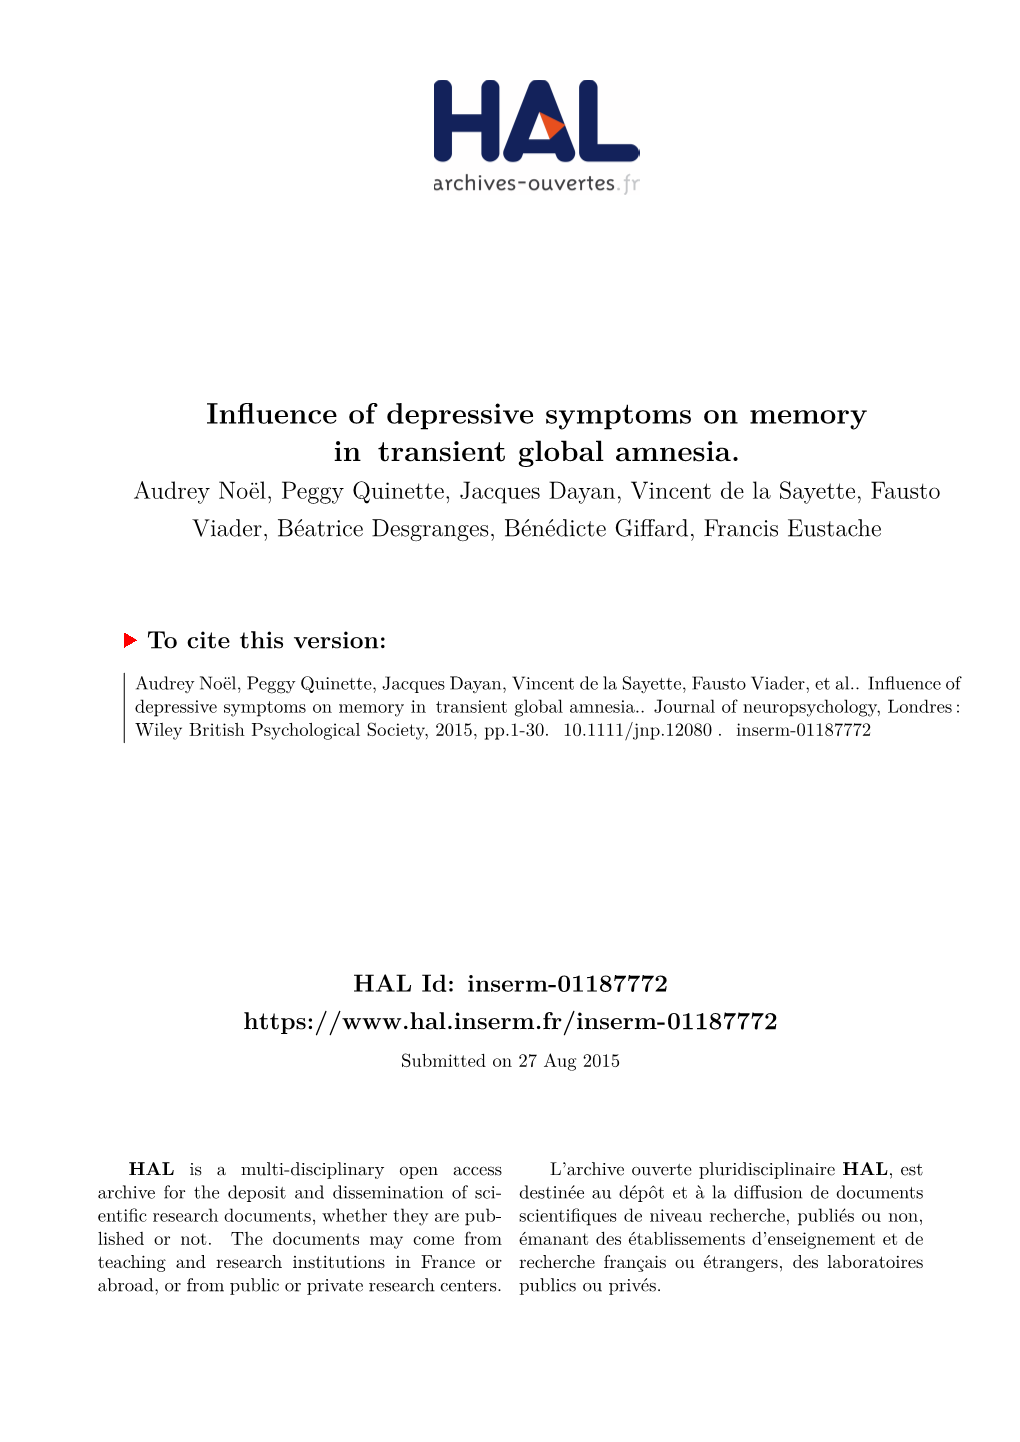 Influence of Depressive Symptoms on Memory in Transient Global Amnesia